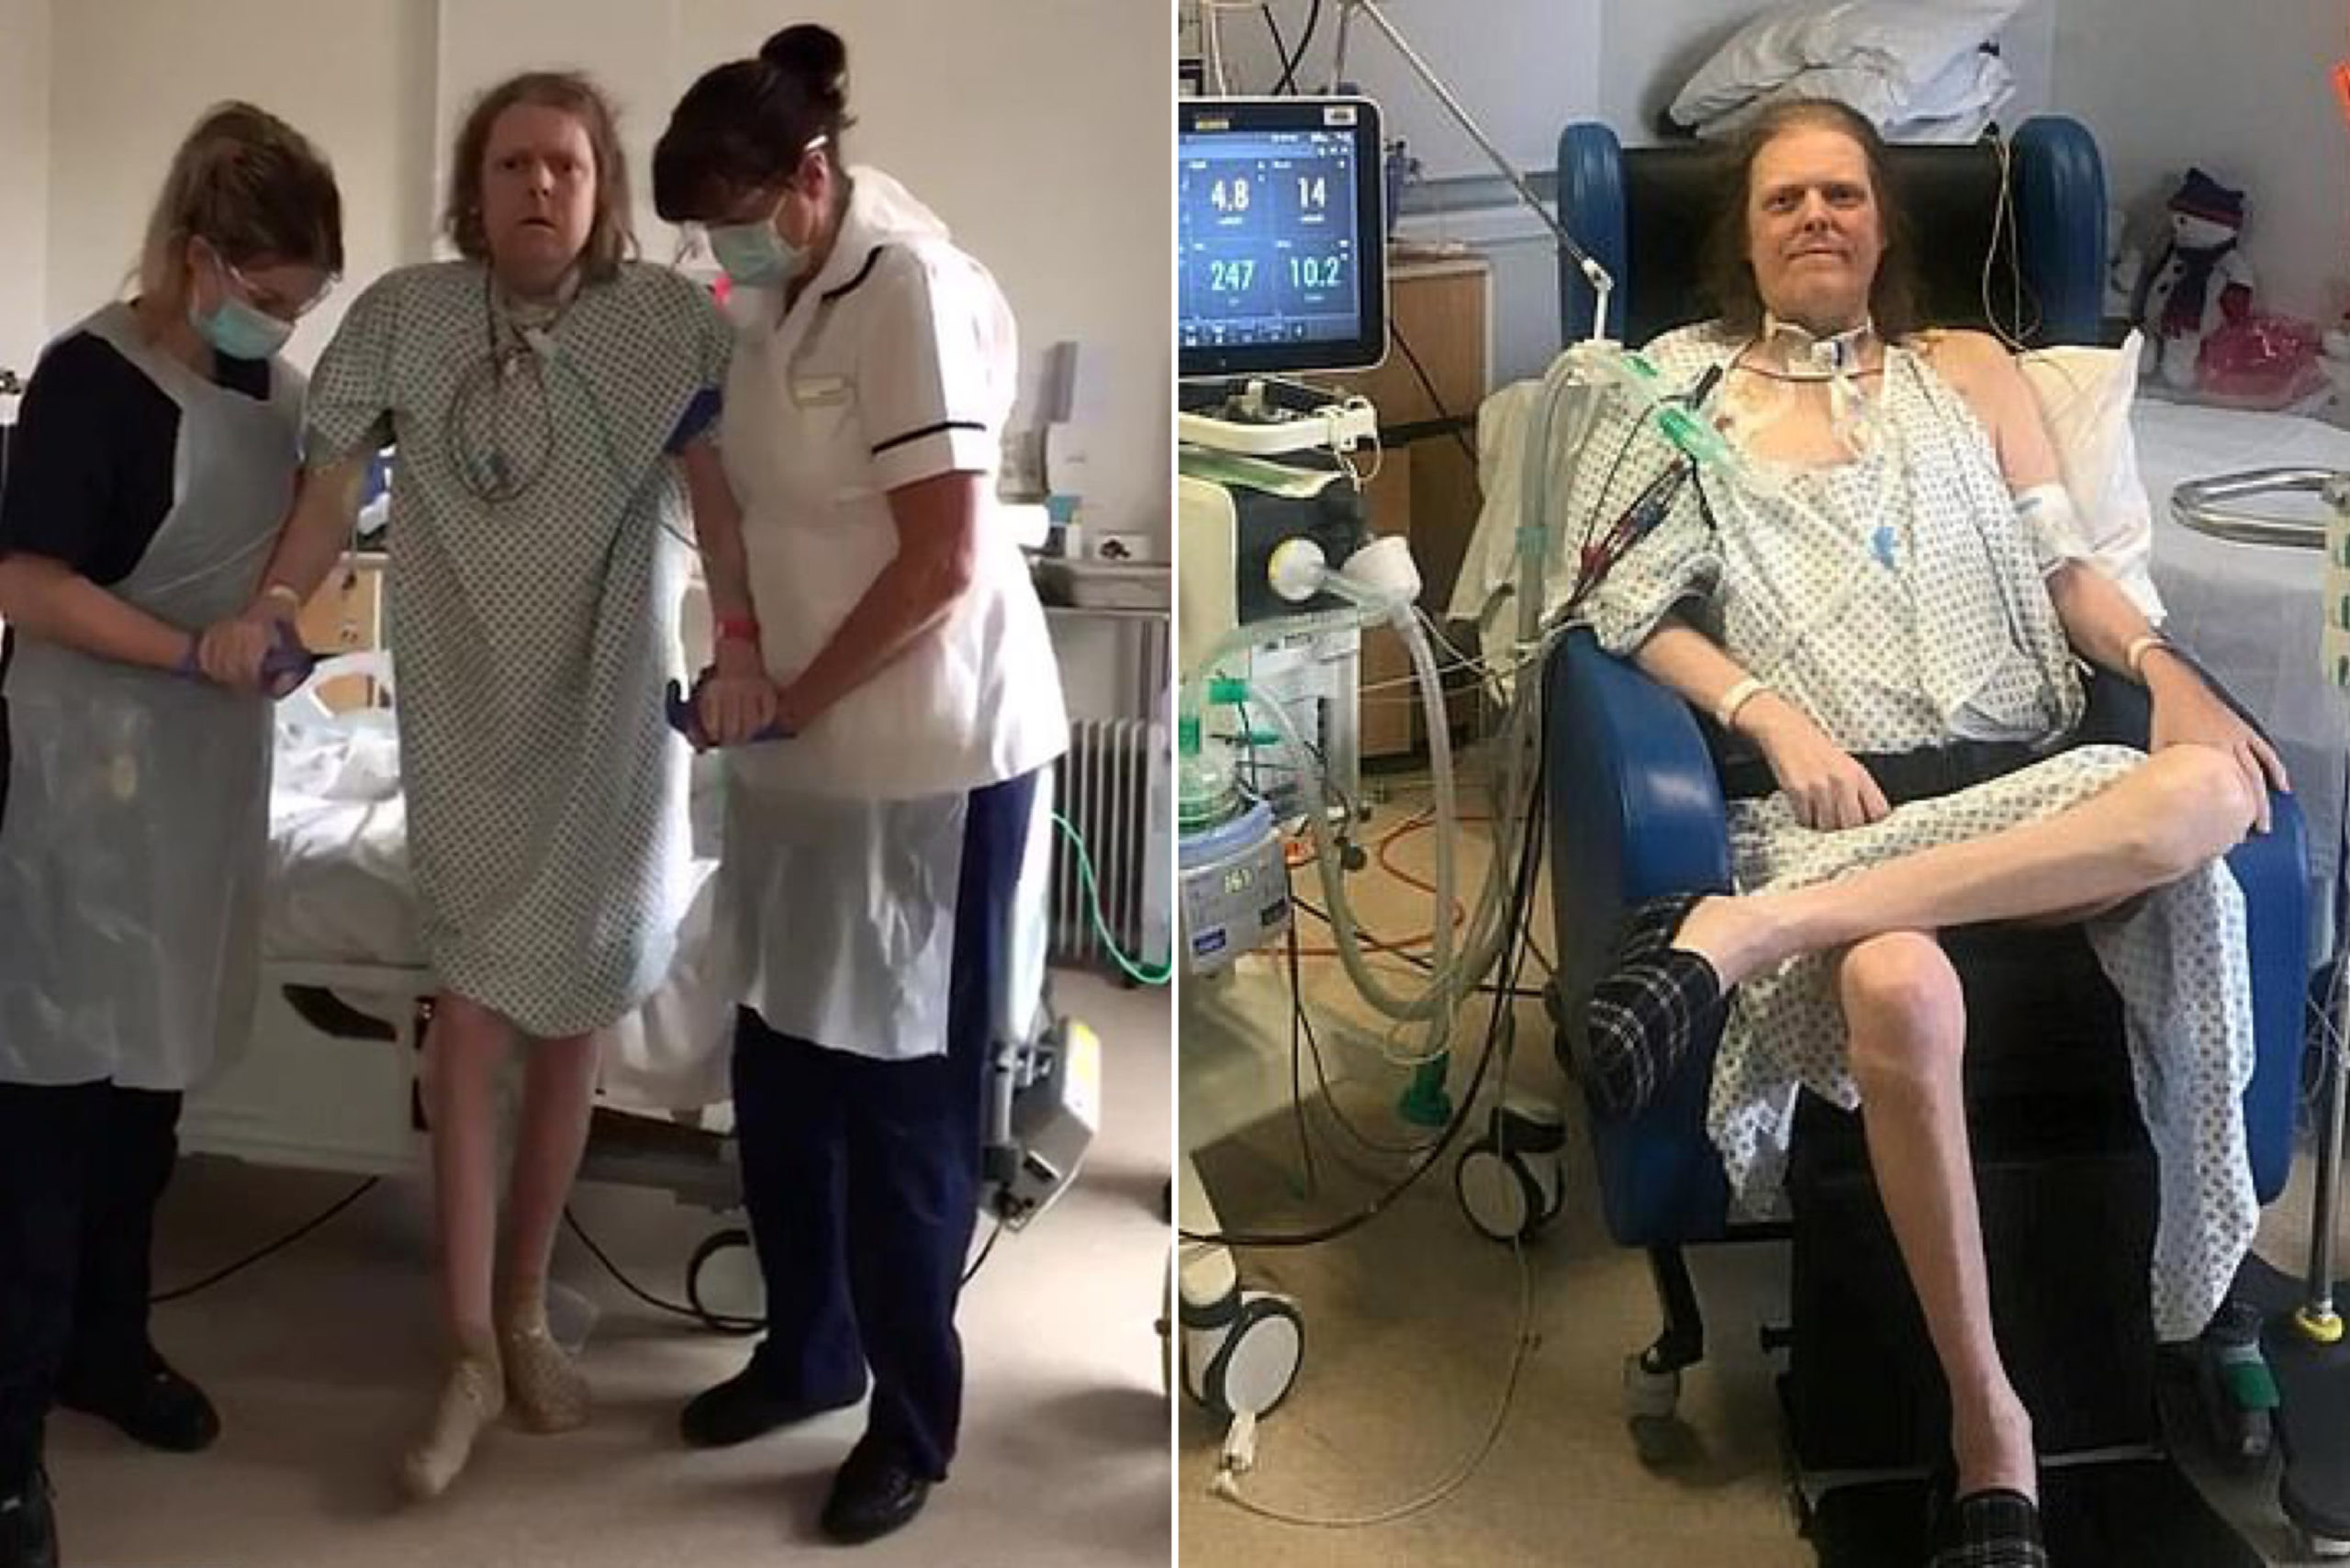 One Of UK’s Longest-Suffering COVID-19 Patient Takes His First Steps Since March